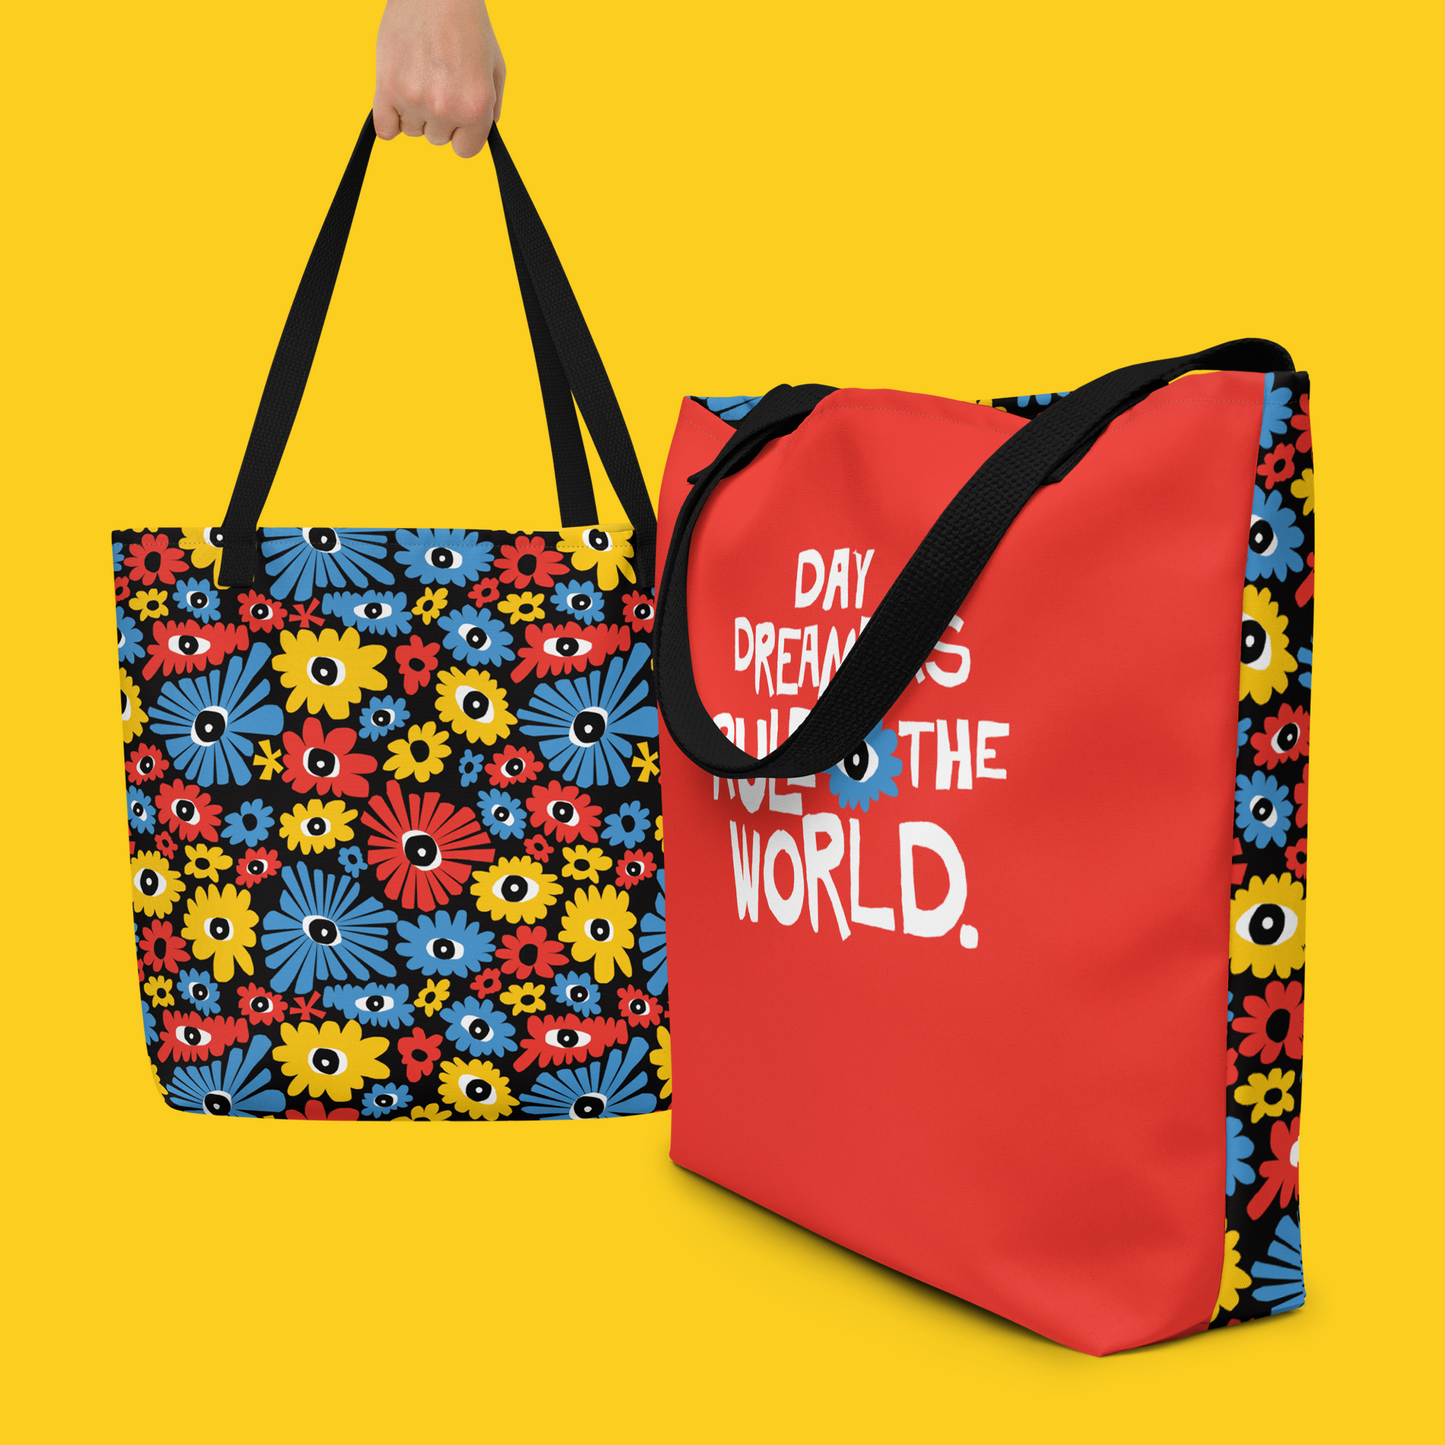 Day Dreamers Rule The World Tote Bag!